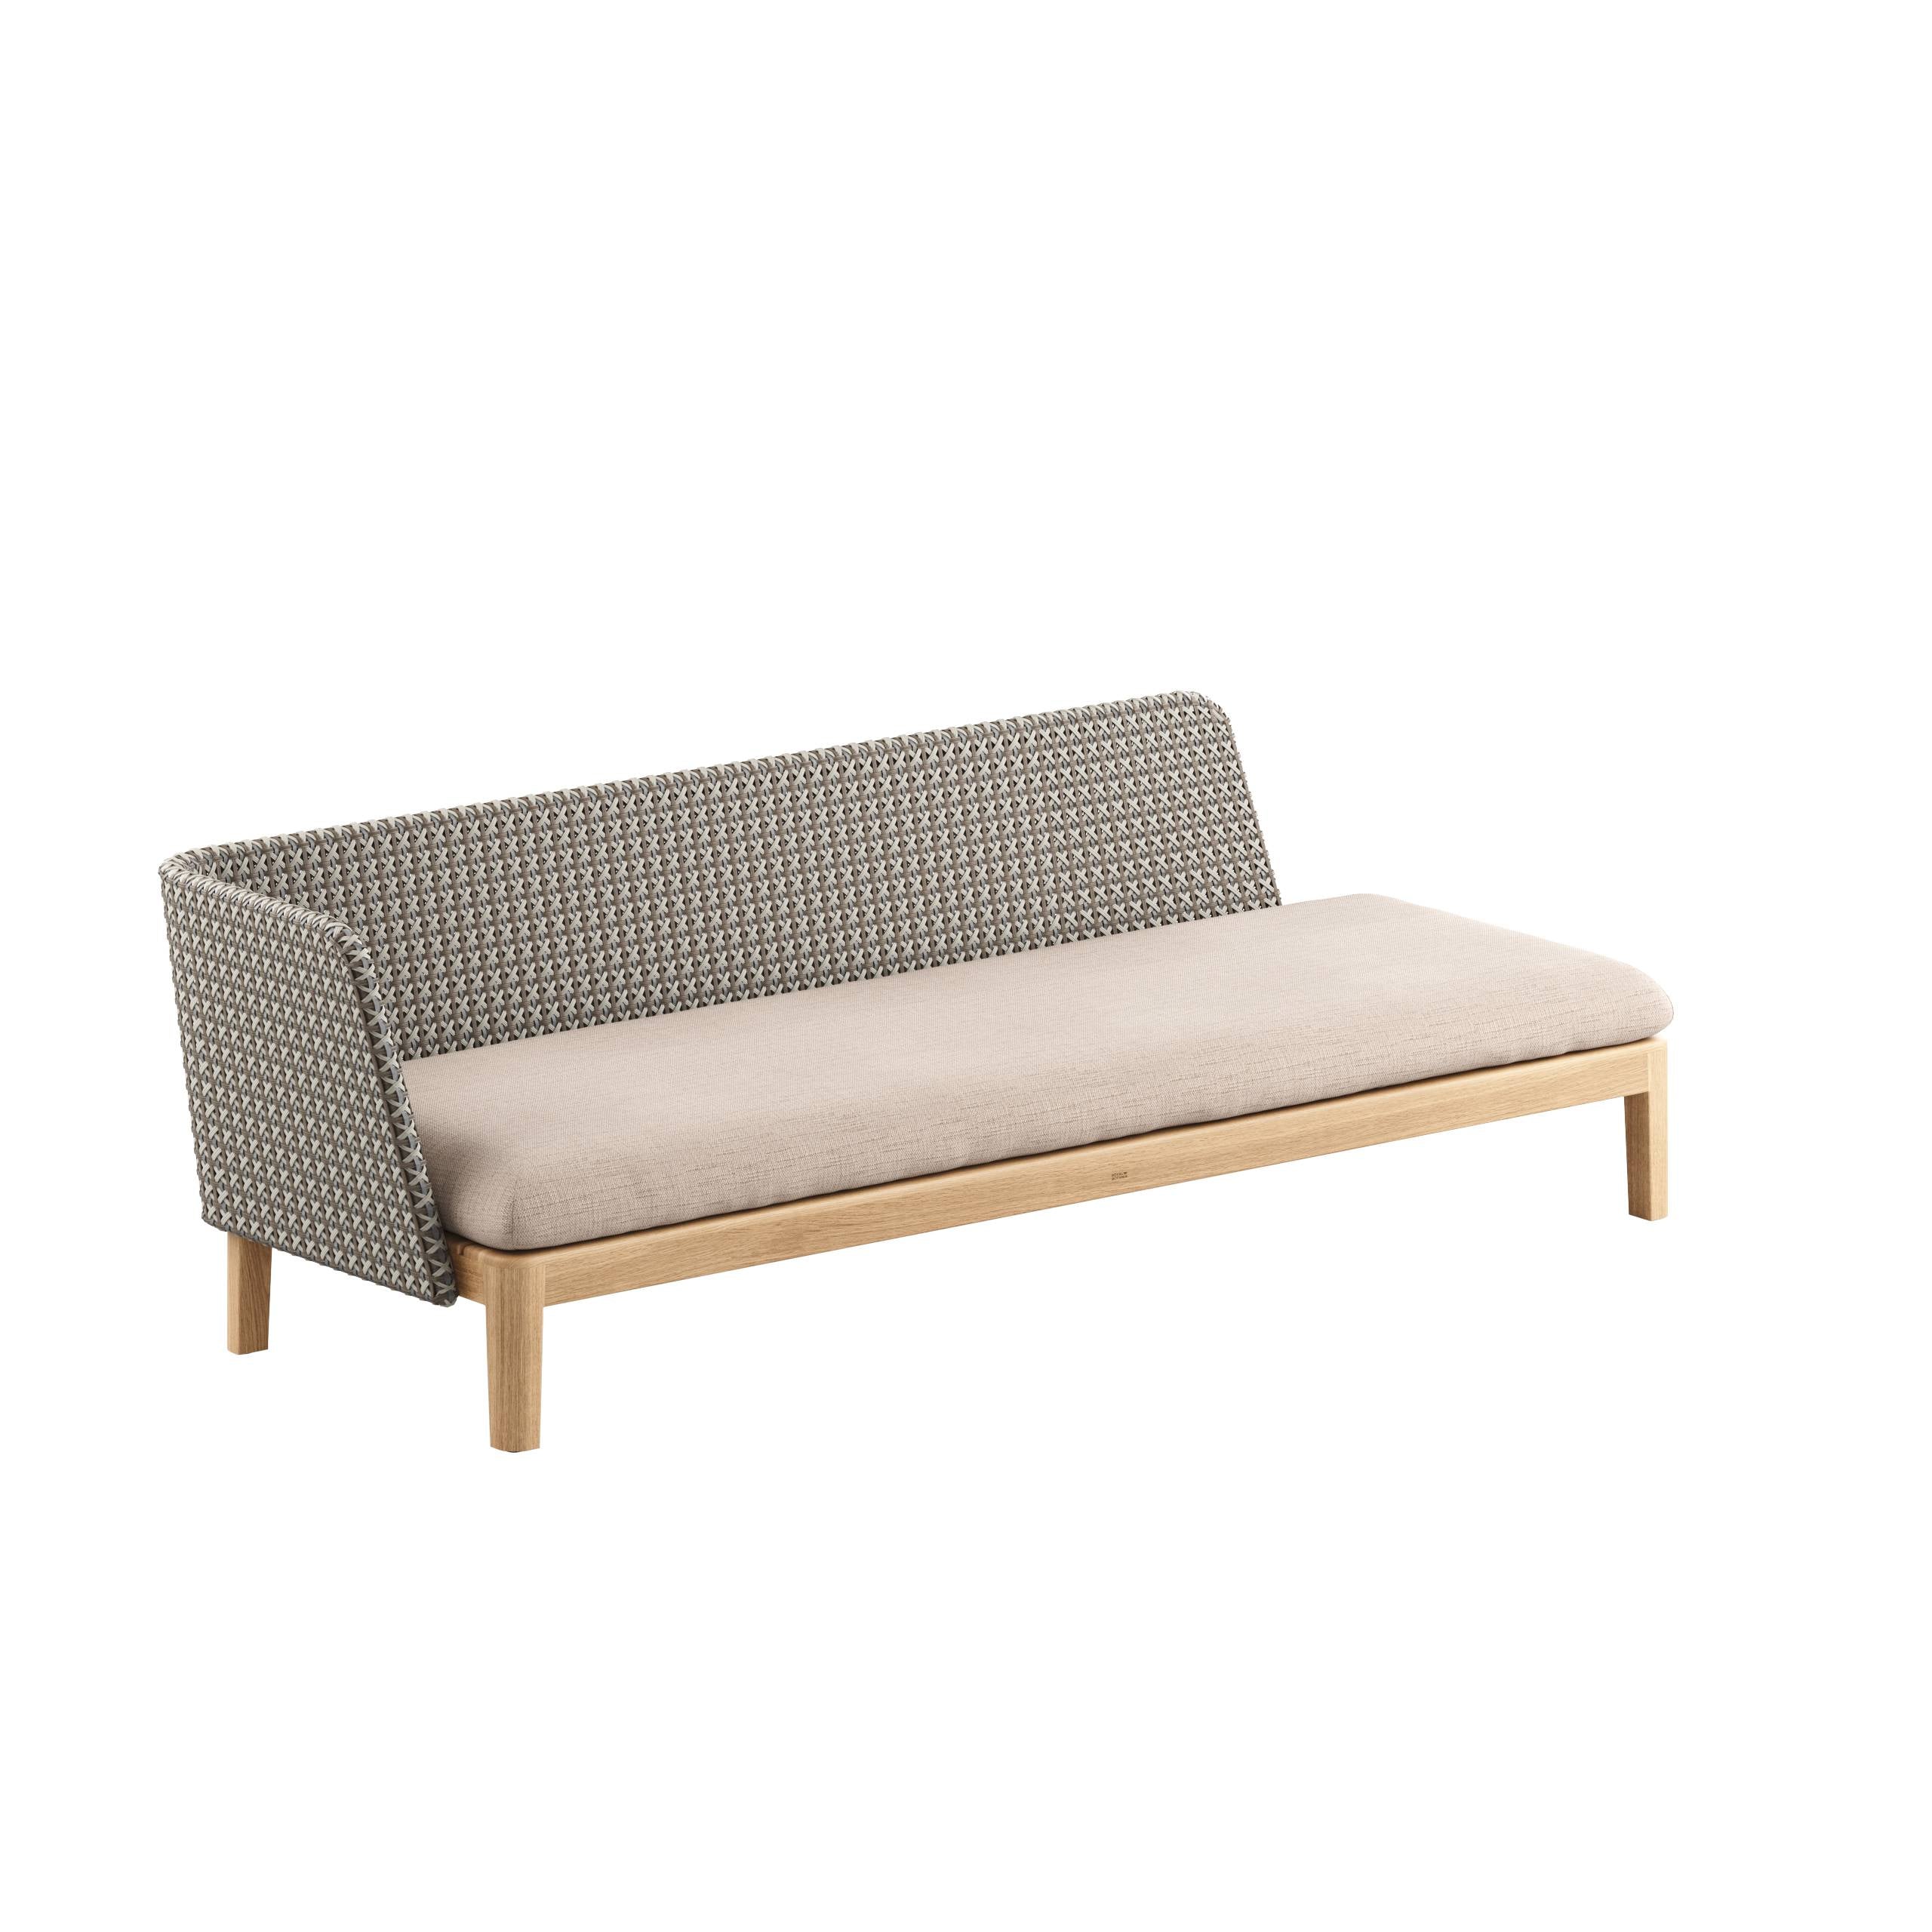 Calypso Lounge 210 R3 With Woven Back And Right Armrest